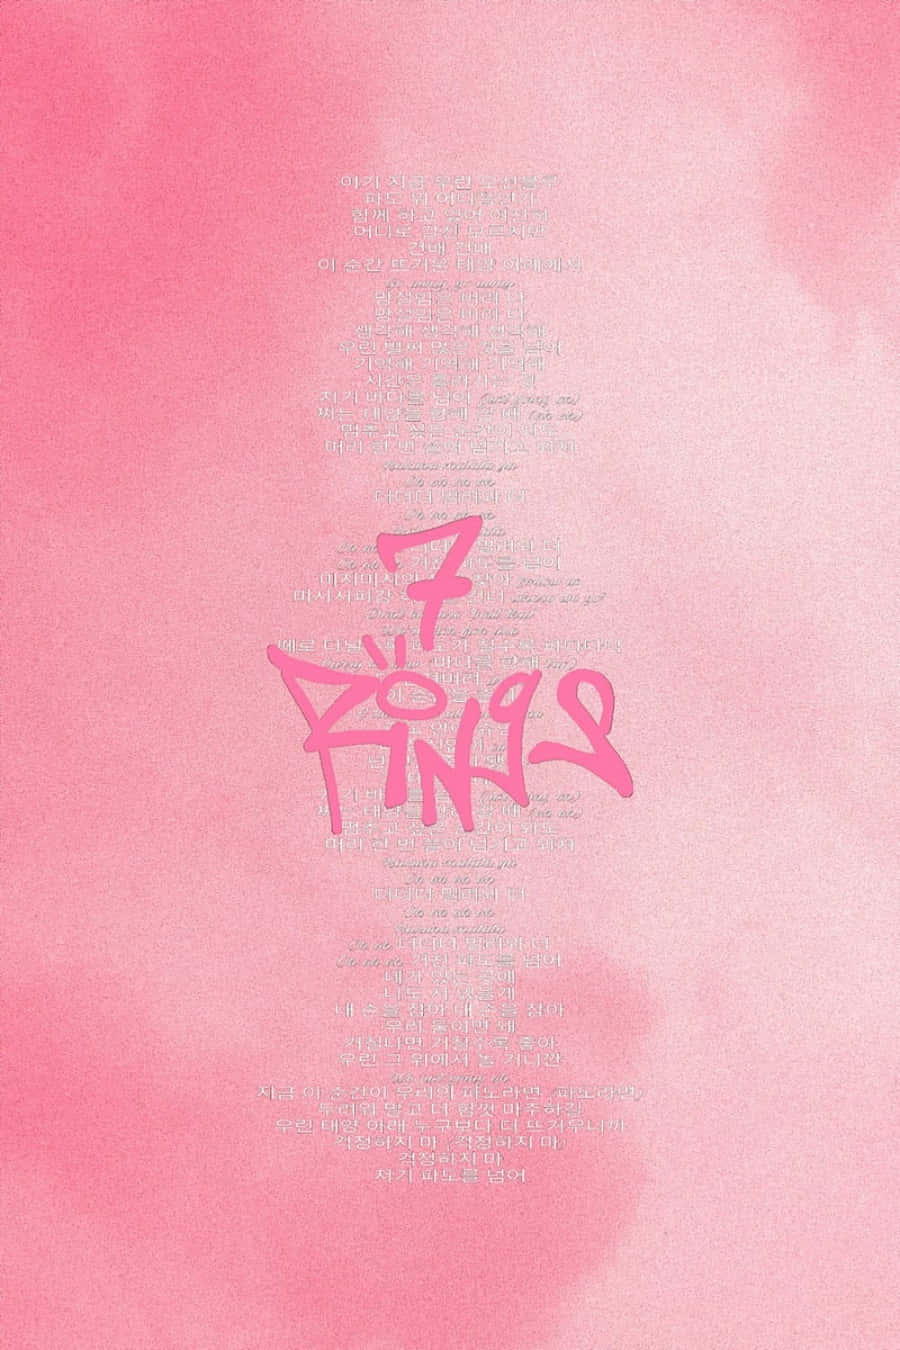 Ariana Grande - 7 rings (Turbo Remix) by Turbo - Free download on ToneDen